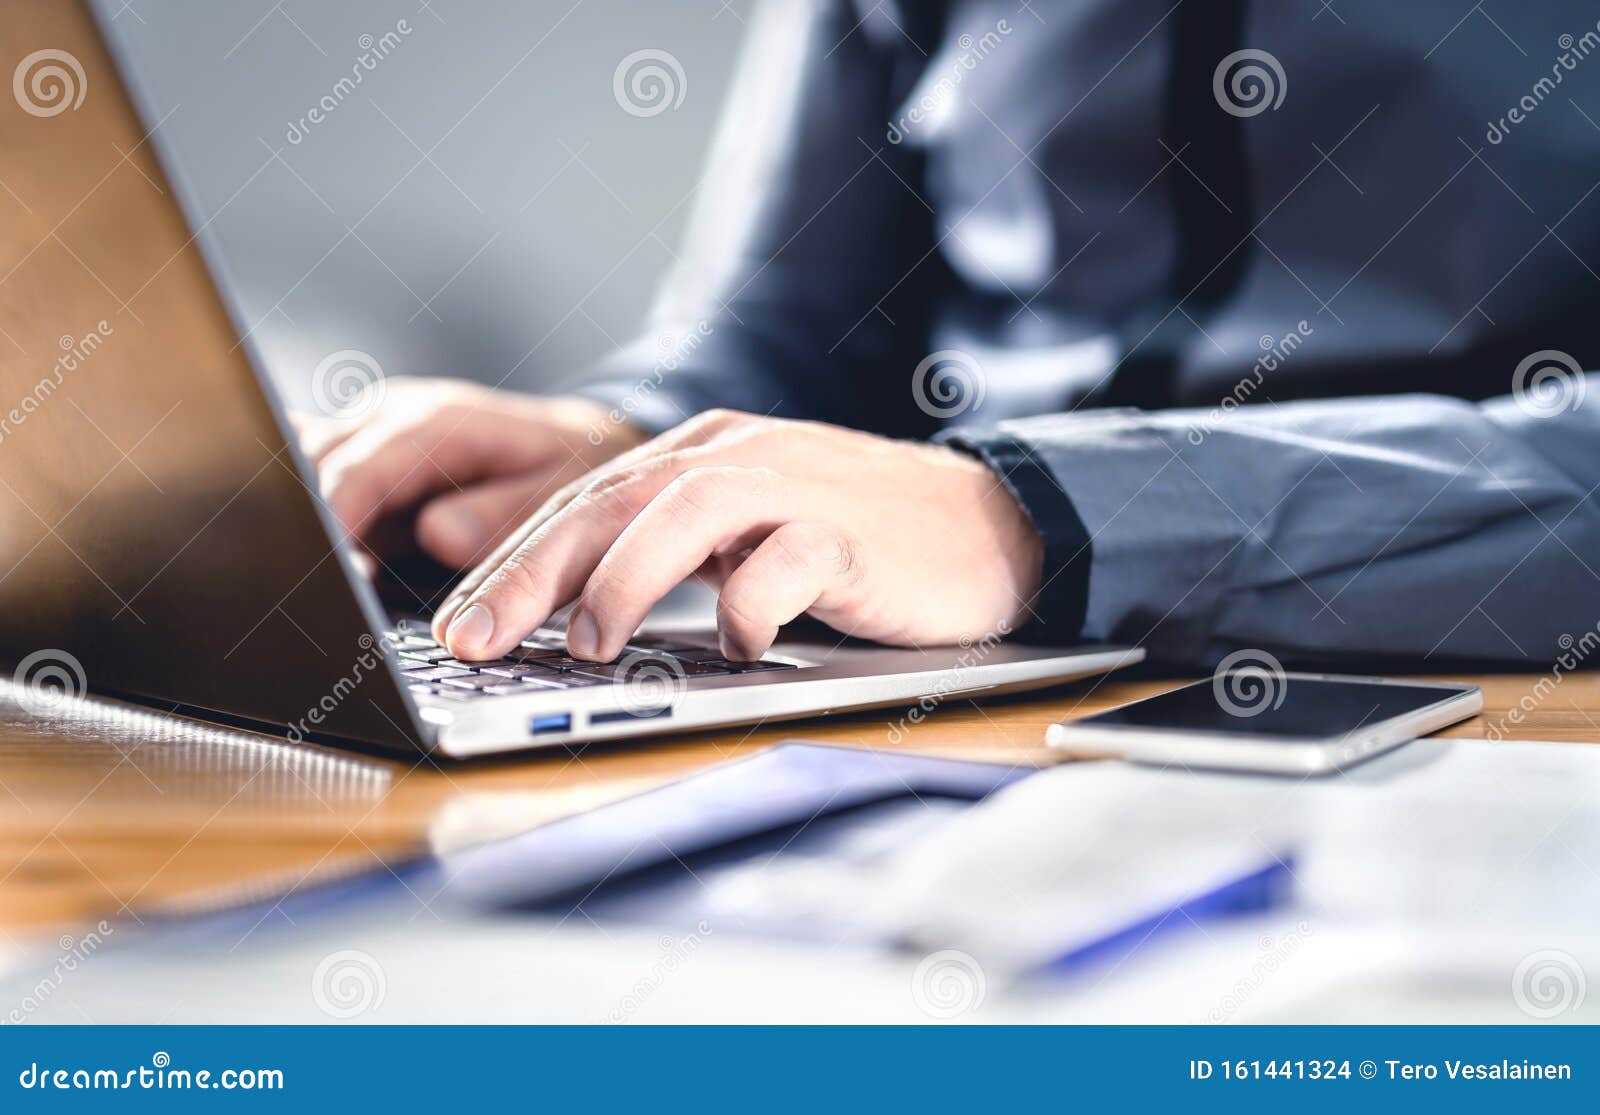 man writing with laptop. smart hipster guy with finance, market and business expertise. freelance work with digital device.